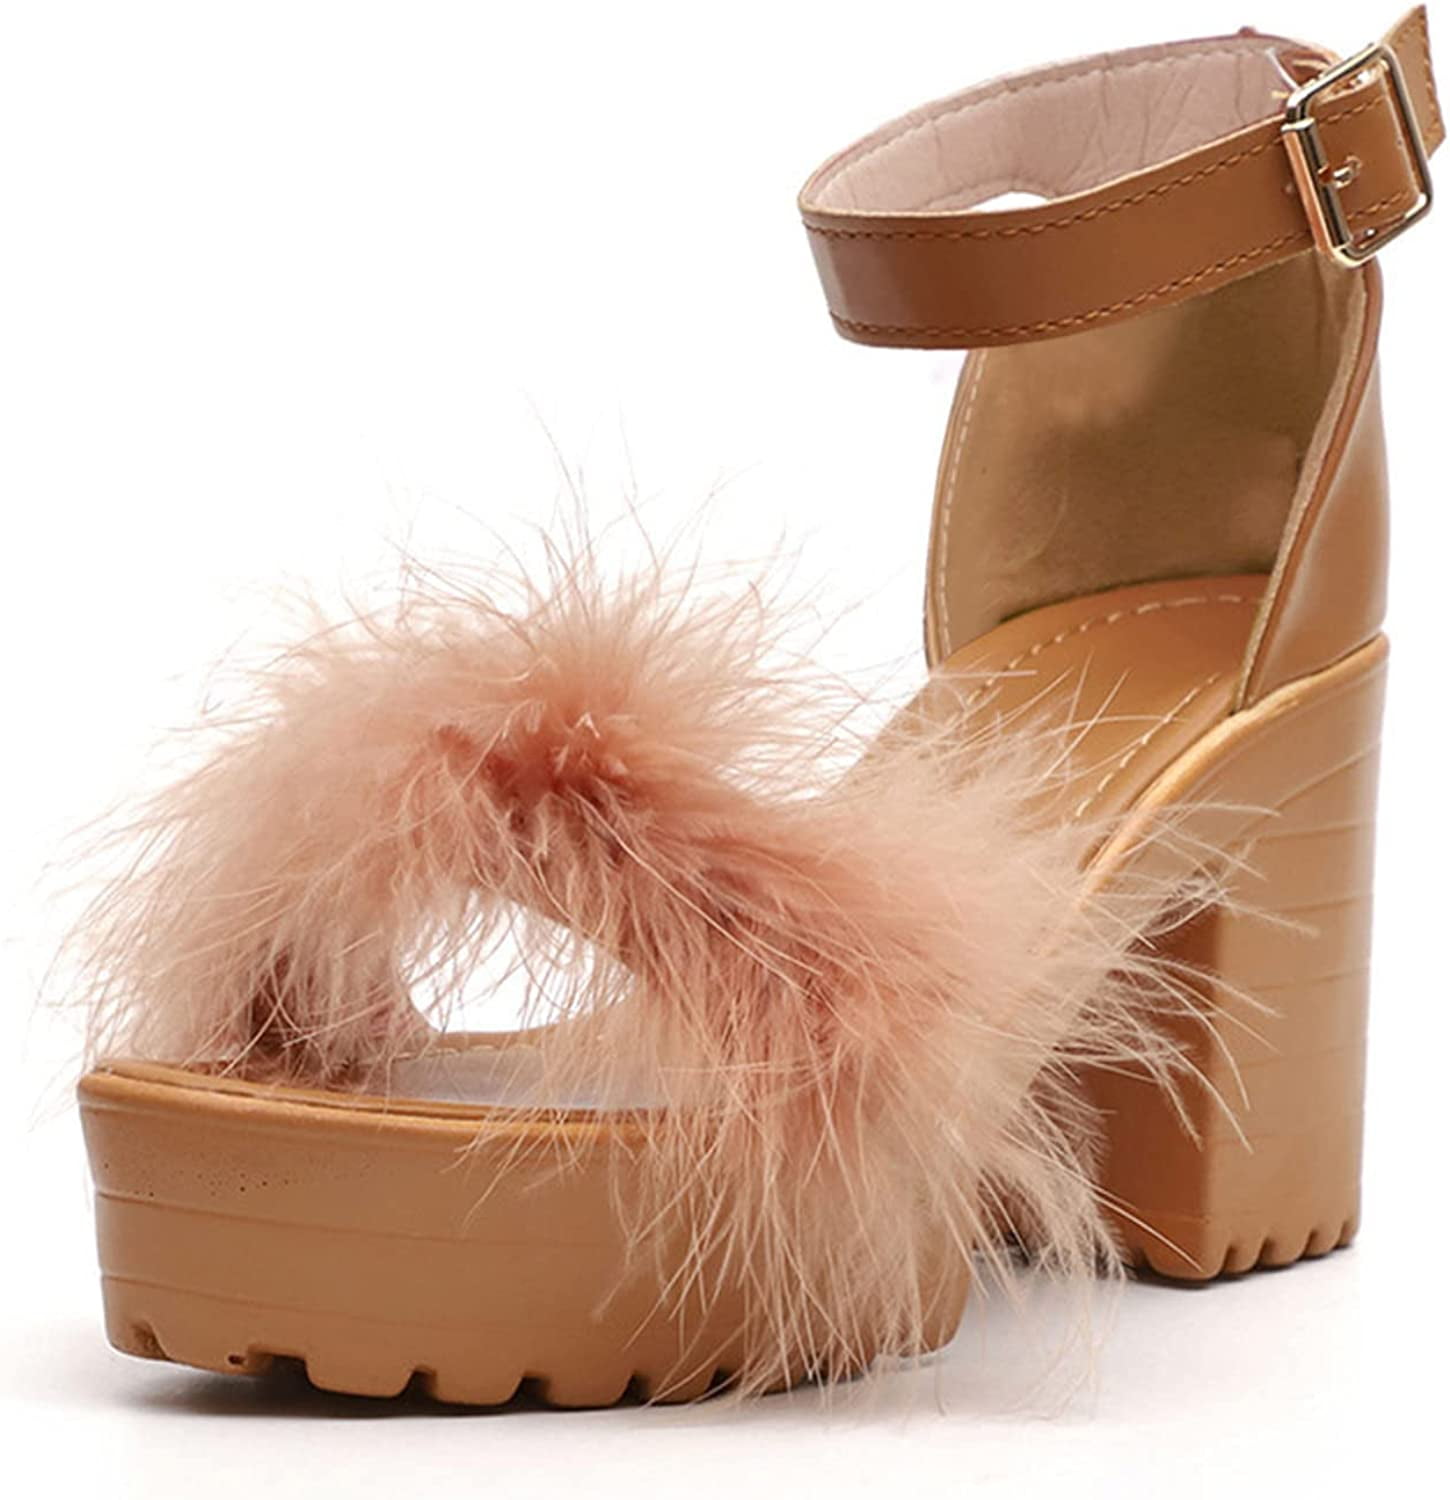 Fluffy Chunky Heeled Strap Sandals by Shein - New Women's Shoes New Size 8  | eBay